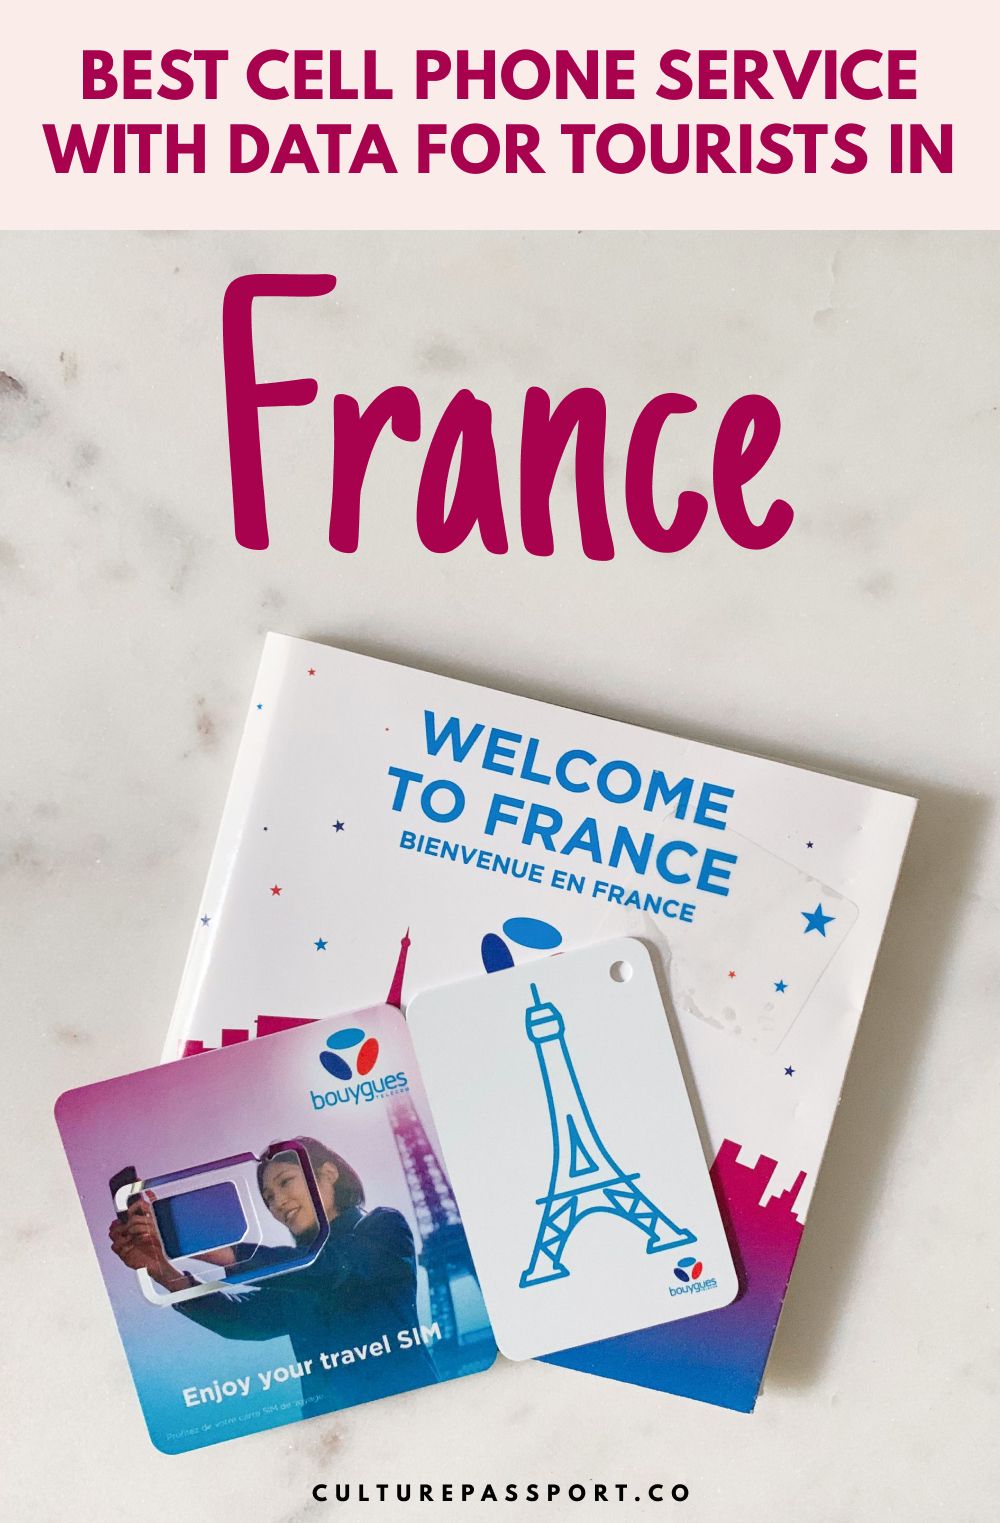 The Best Prepaid Cell Phone Plans & Data for Tourists in France